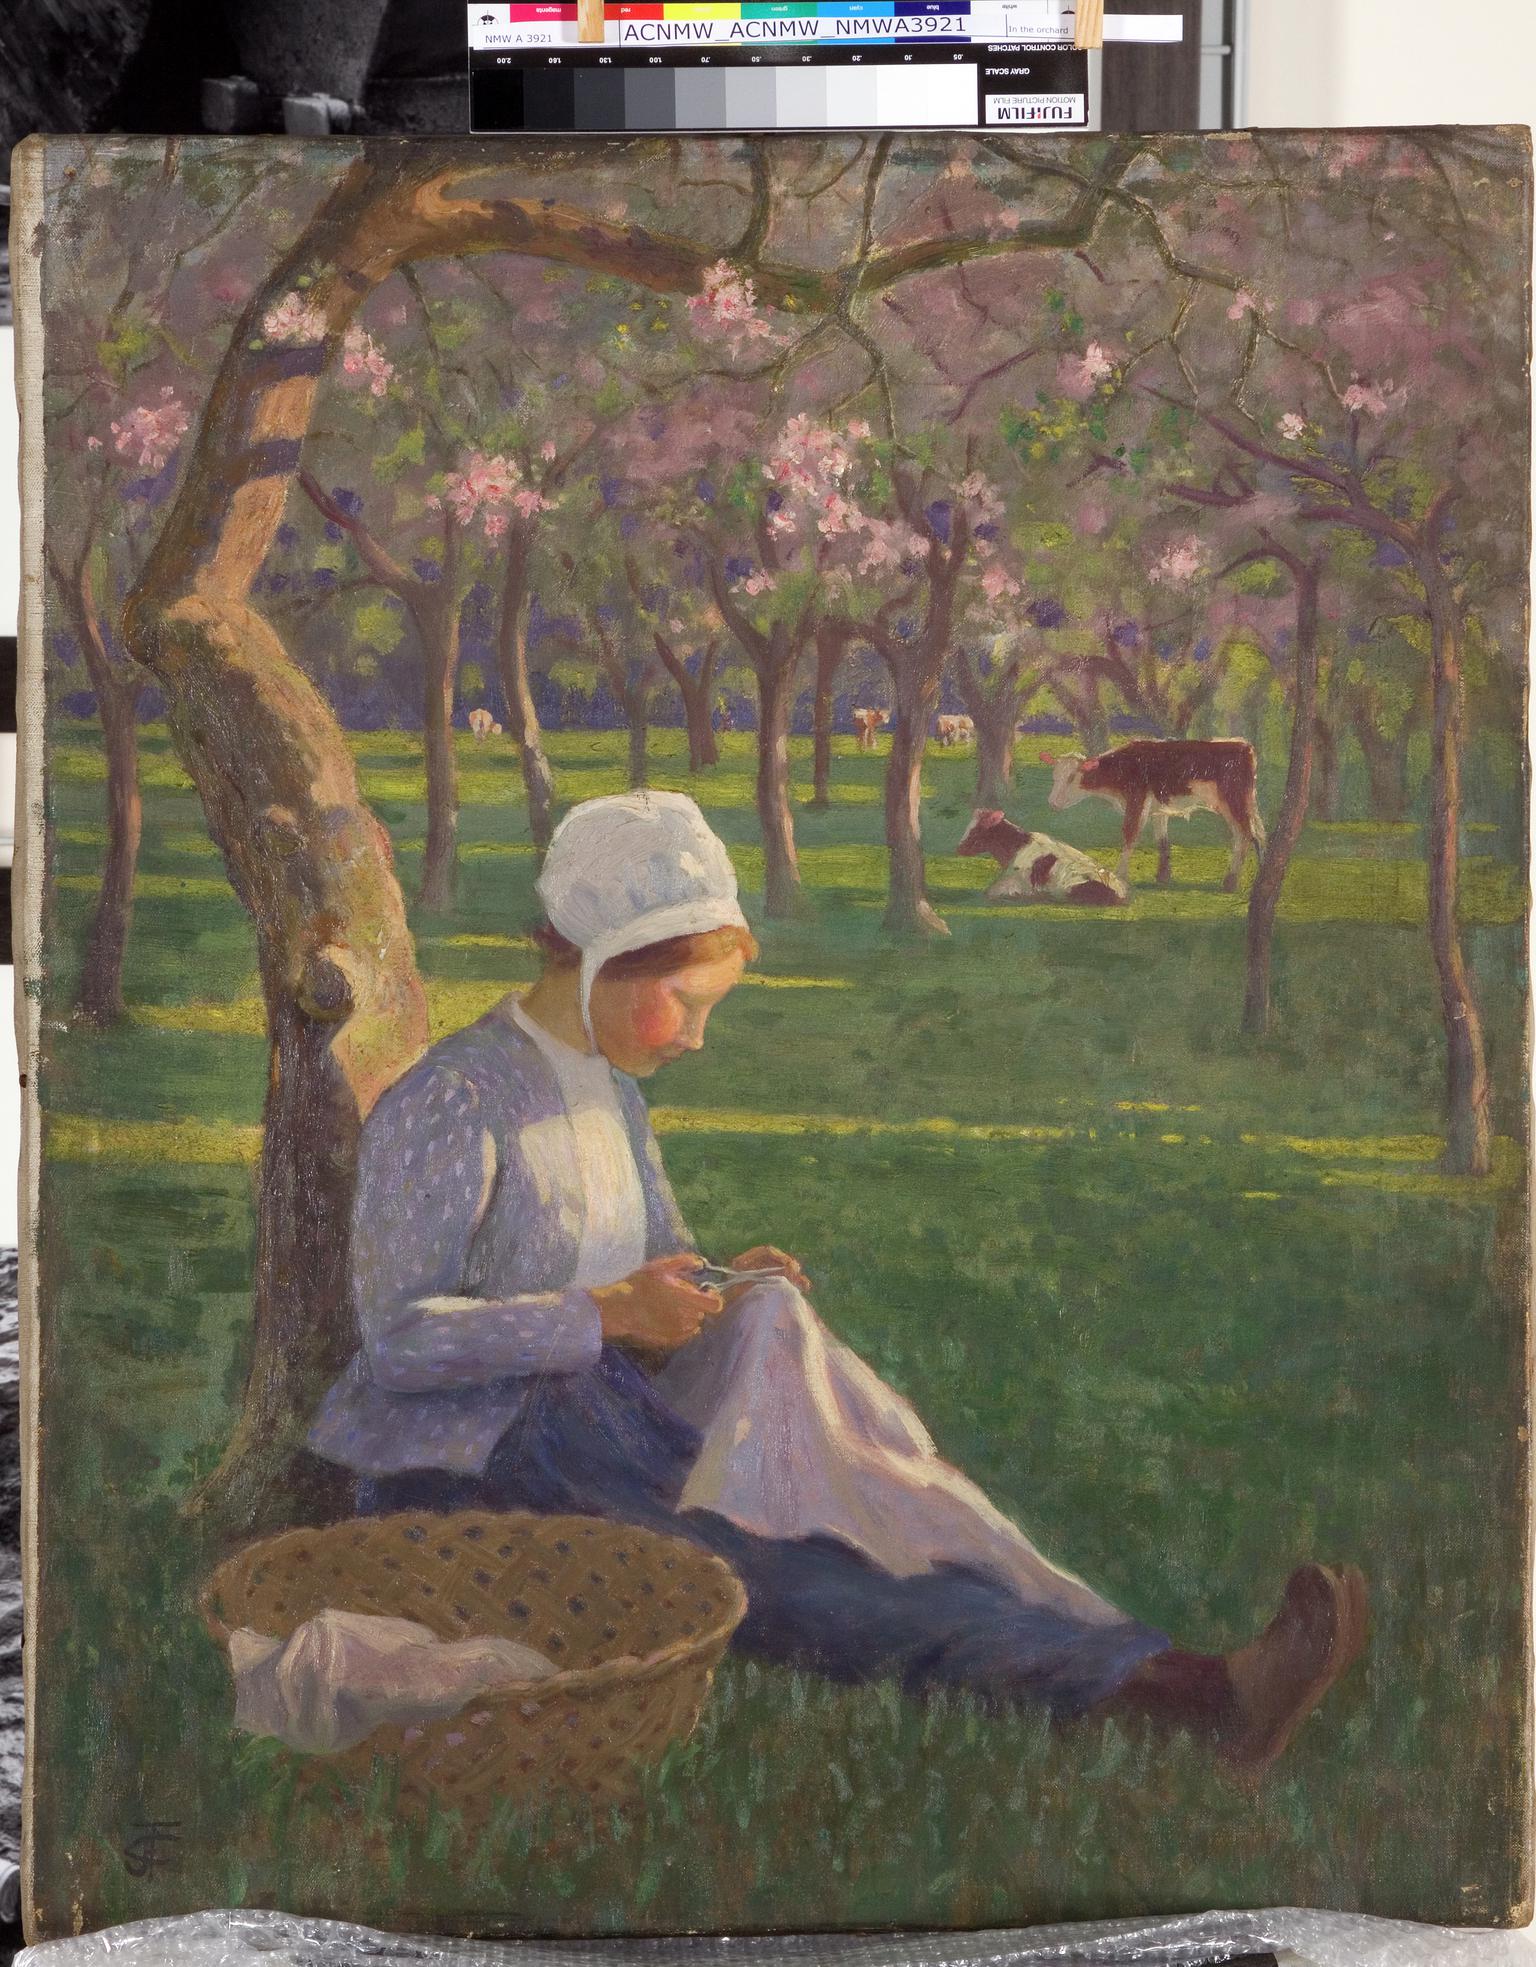 In the orchard